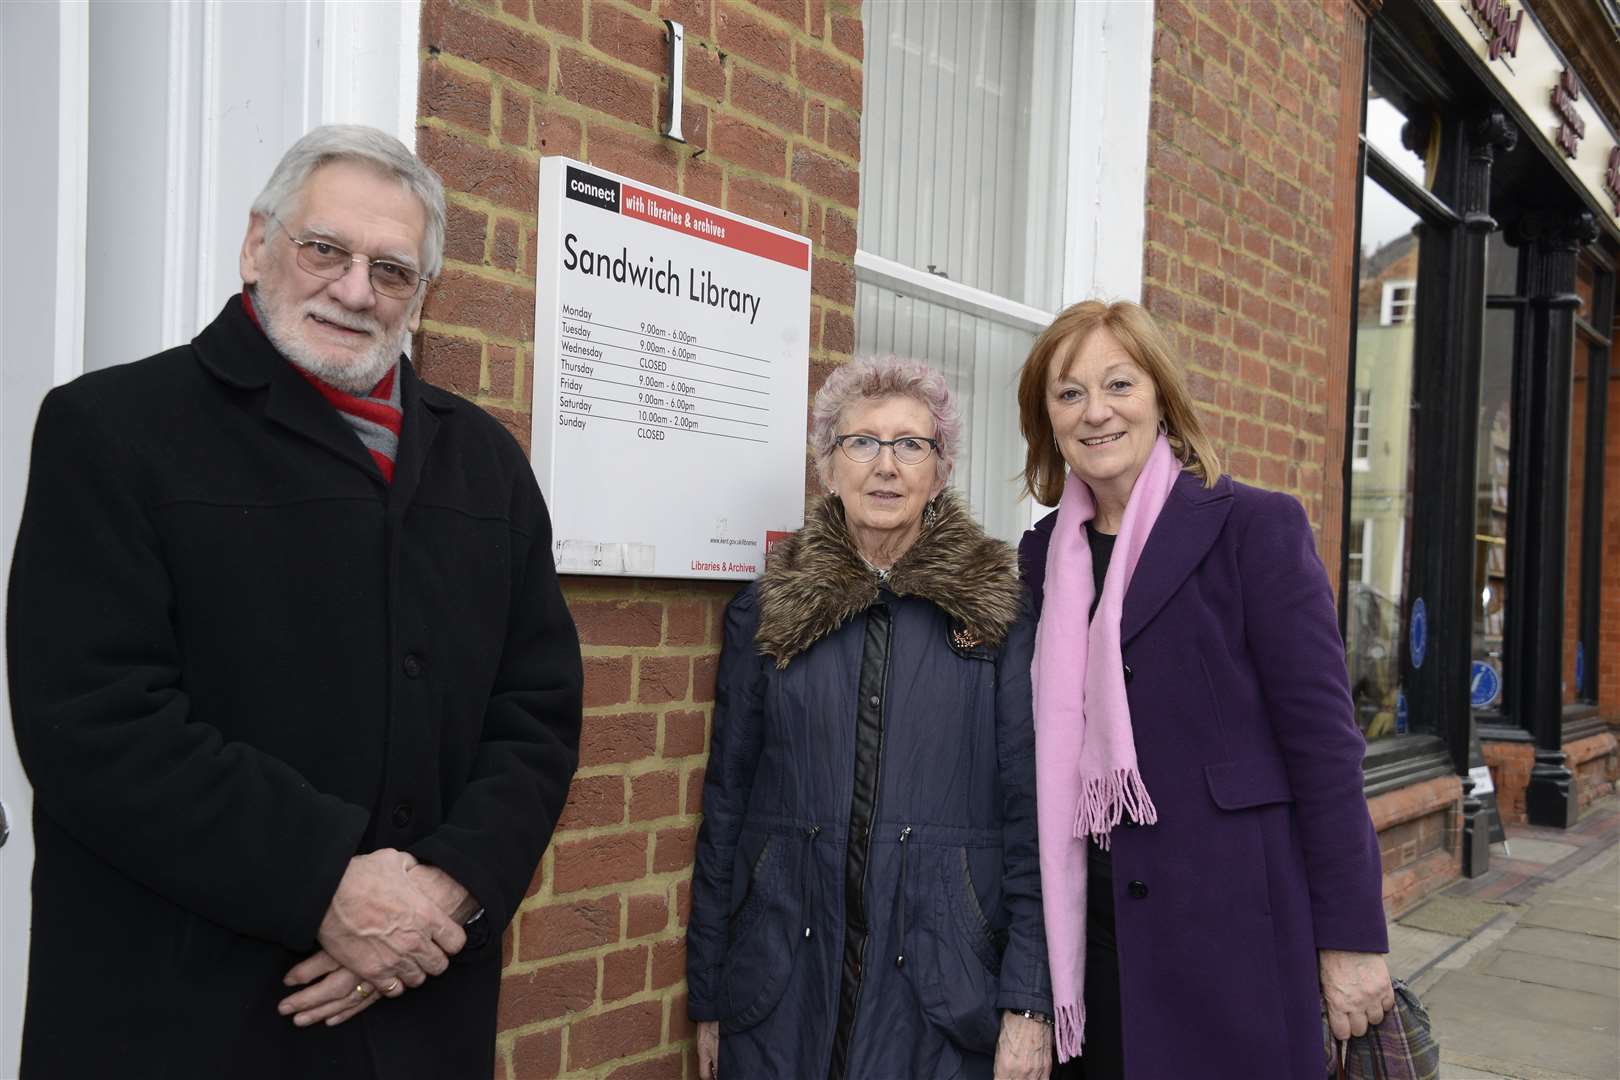 Sandwich Library Guild members Margaret Simpson, Cilla Phillips and Robert Tomlins